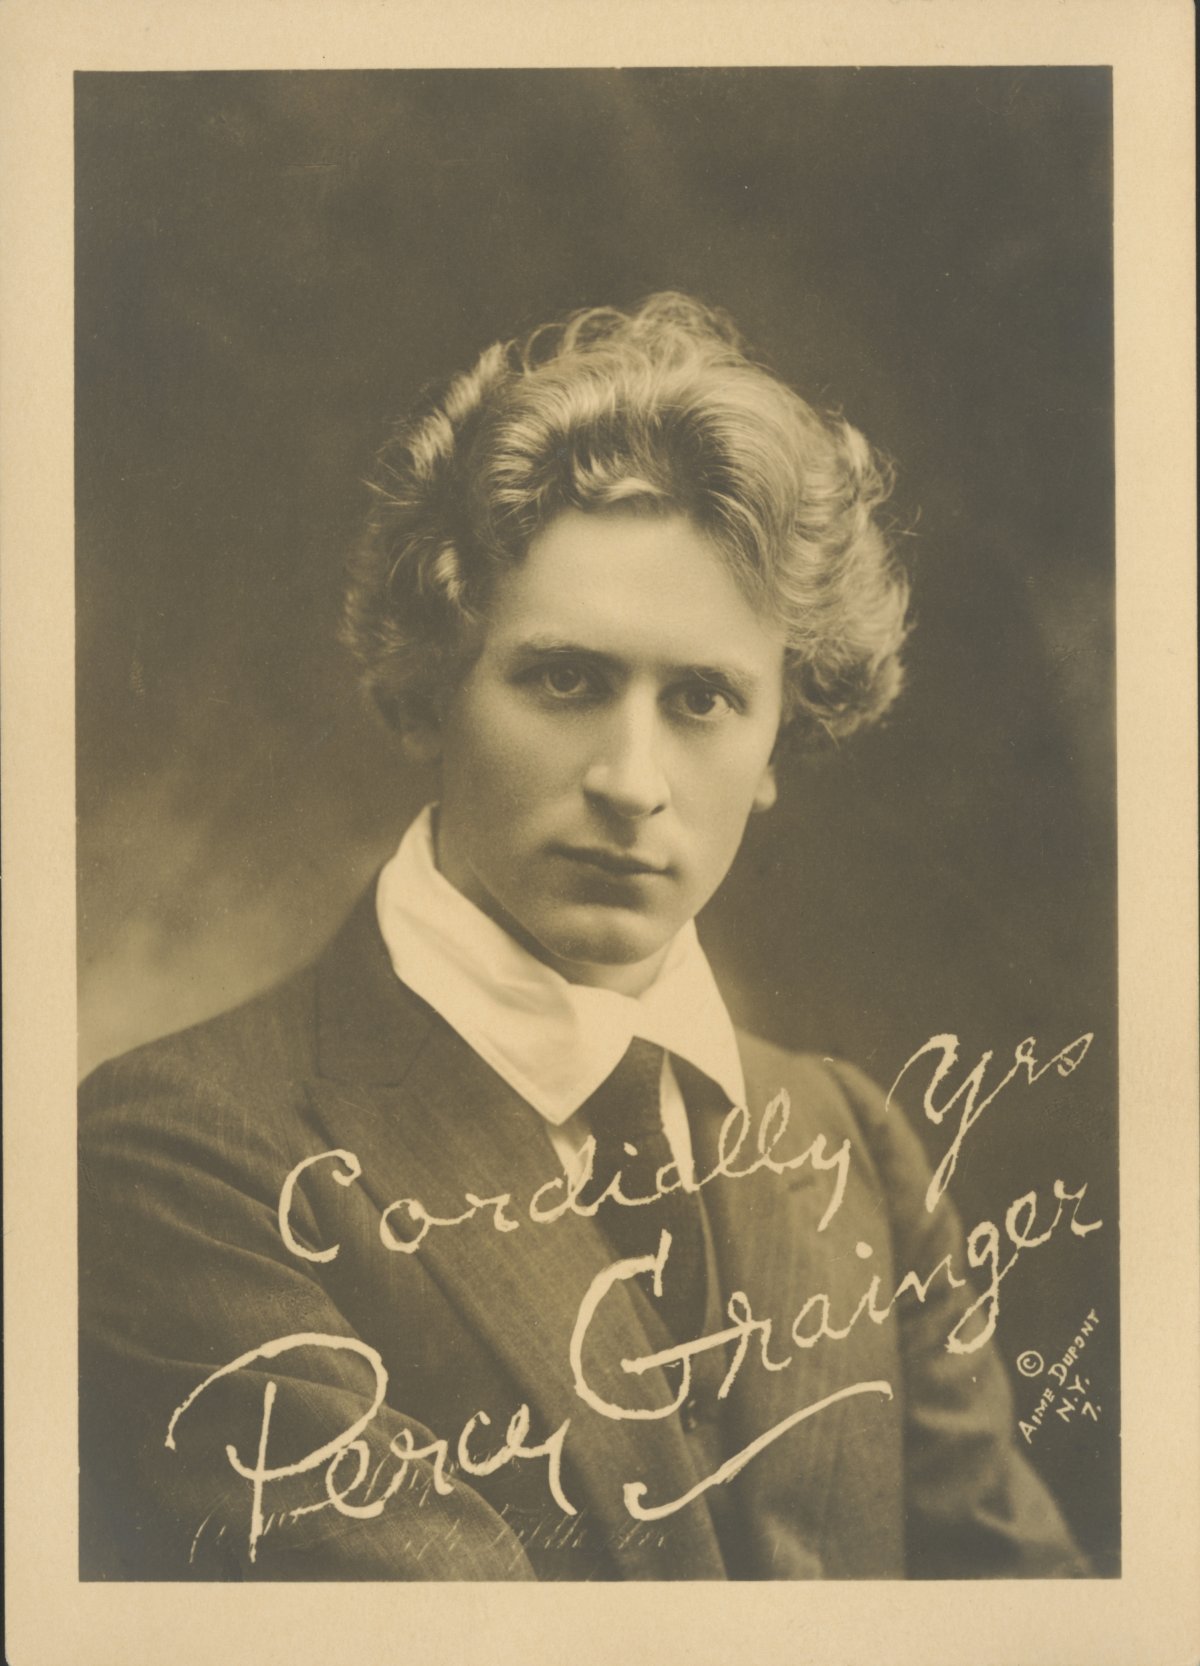 A sepia toned portrait of a young man with wavy blond hair. He is wearing a shirt with large lapels and black tie. Signed on the photo are the words "Cordially yours, Percy Grainger"